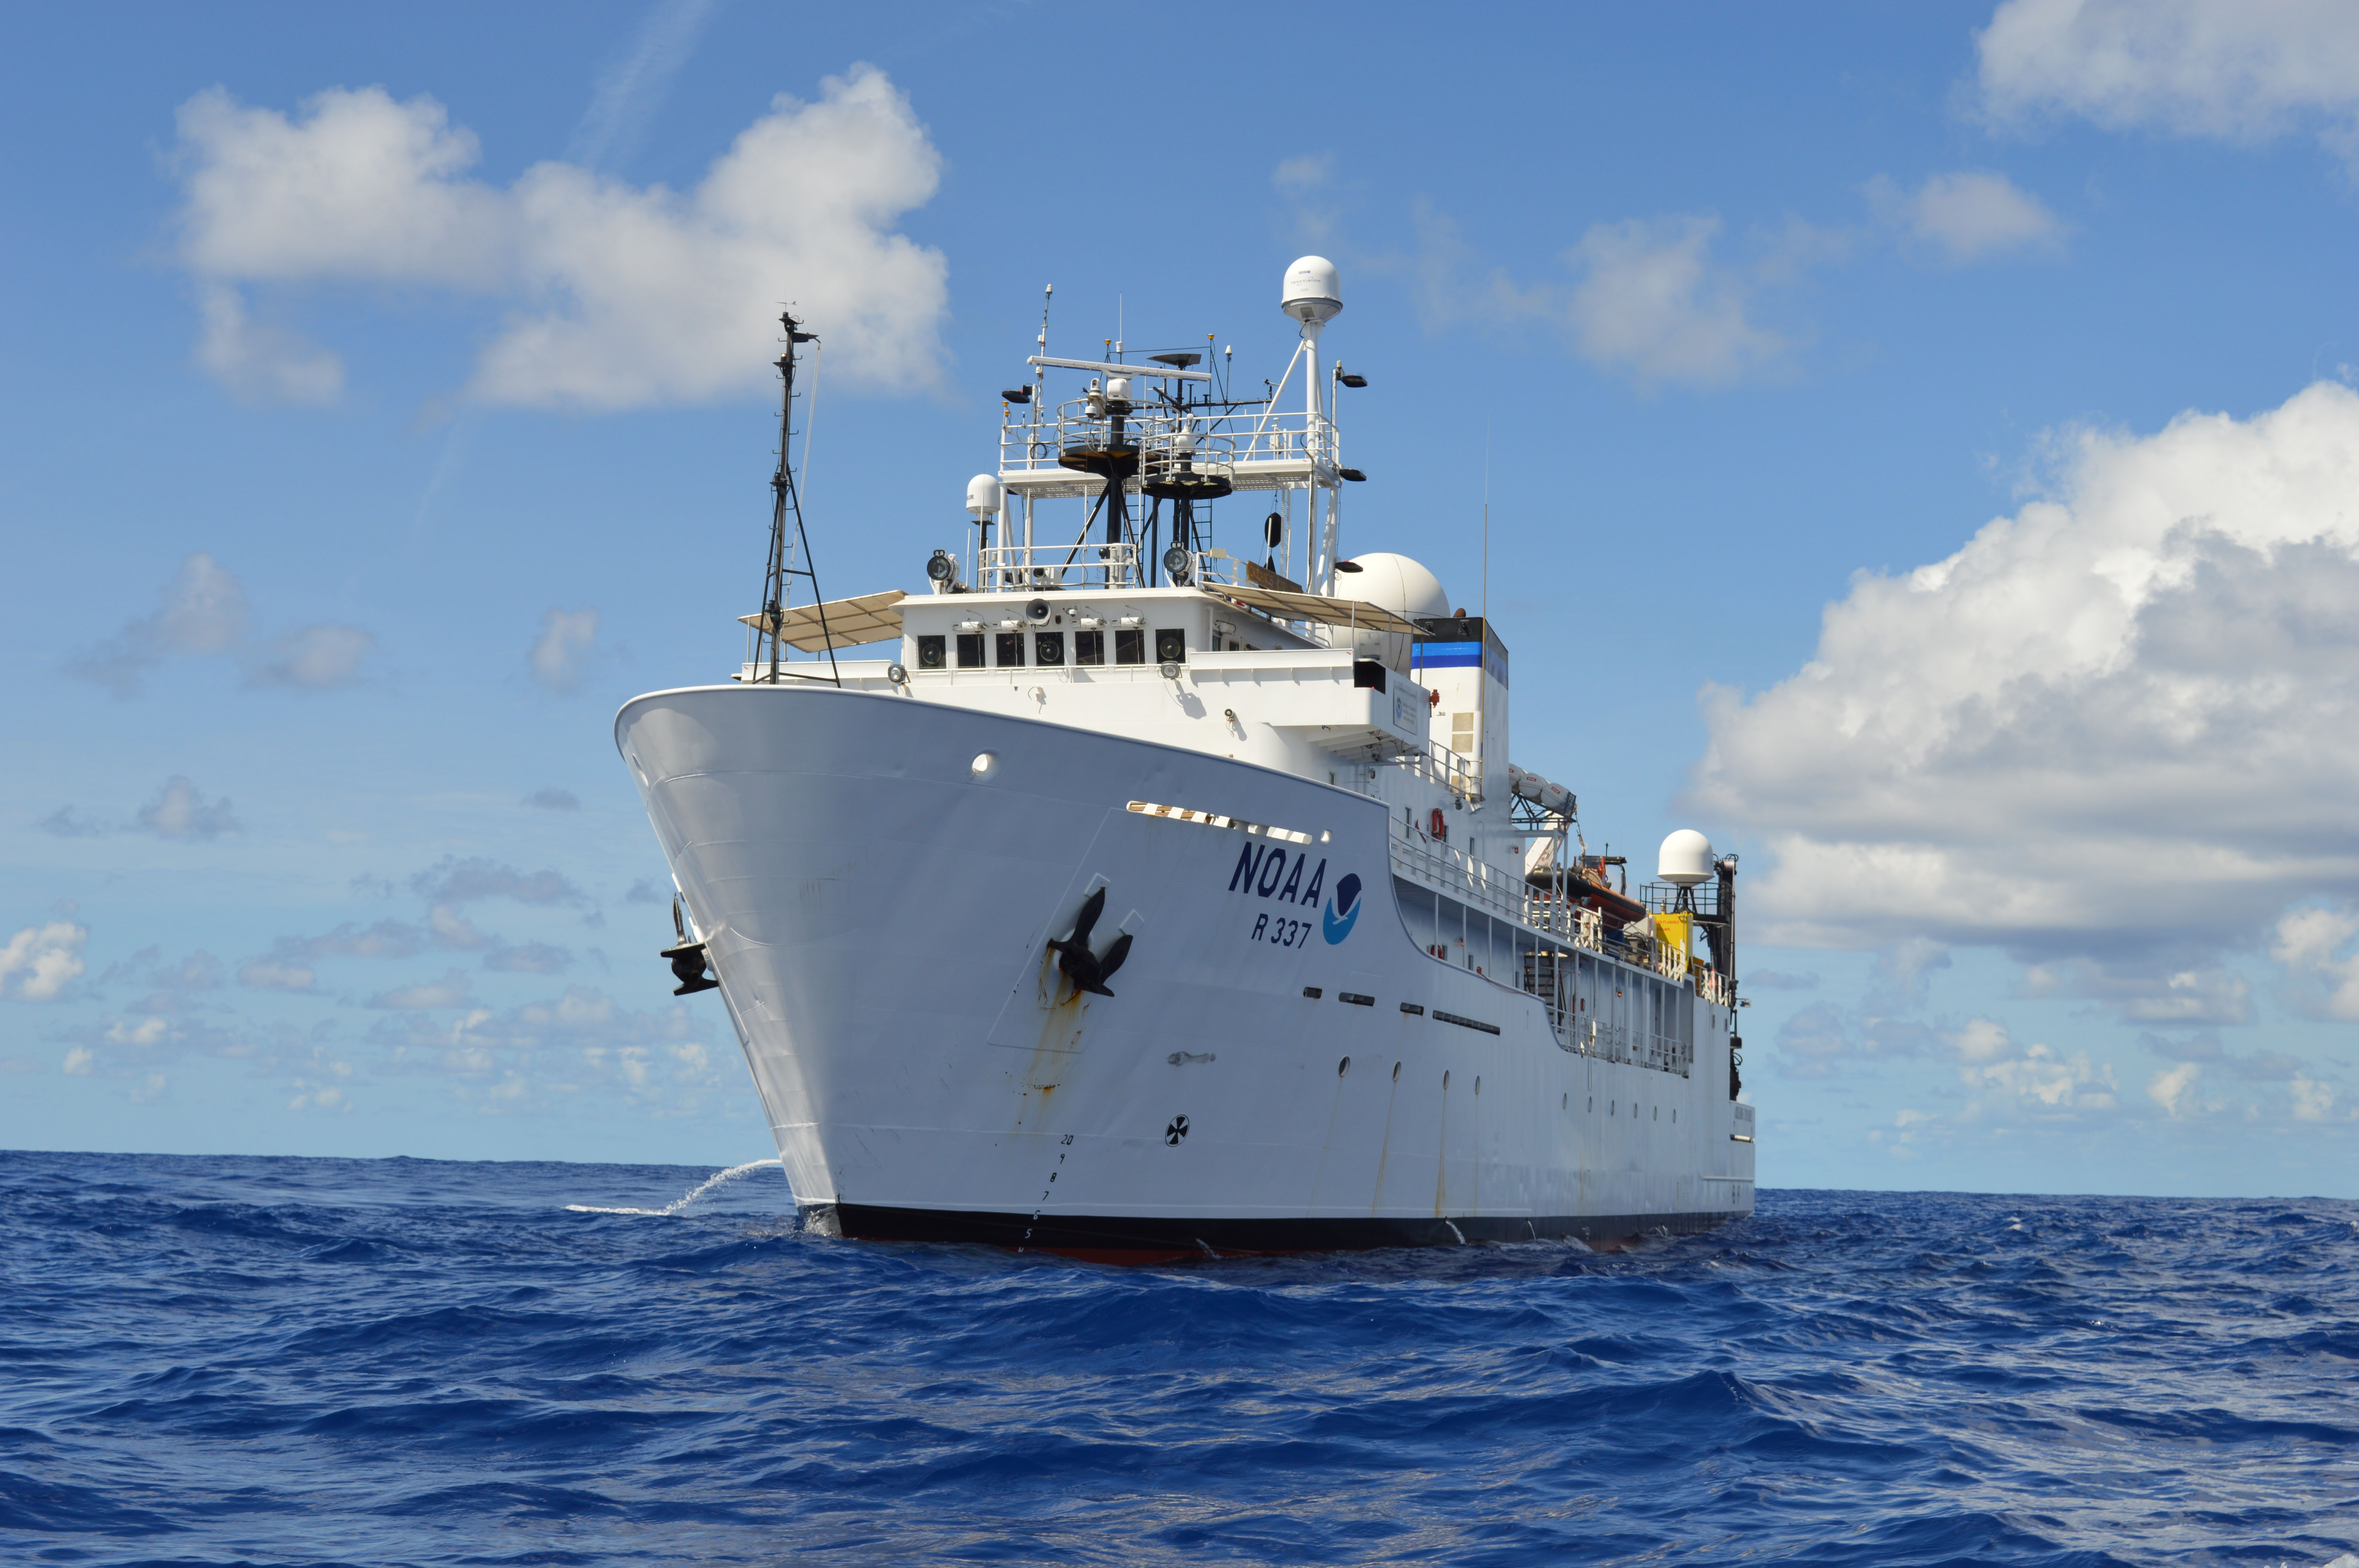 NOAA Ship Okeanos Explorer was first commissioned by NOAA in 2008 to serve as “America’s ship for ocean exploration.”